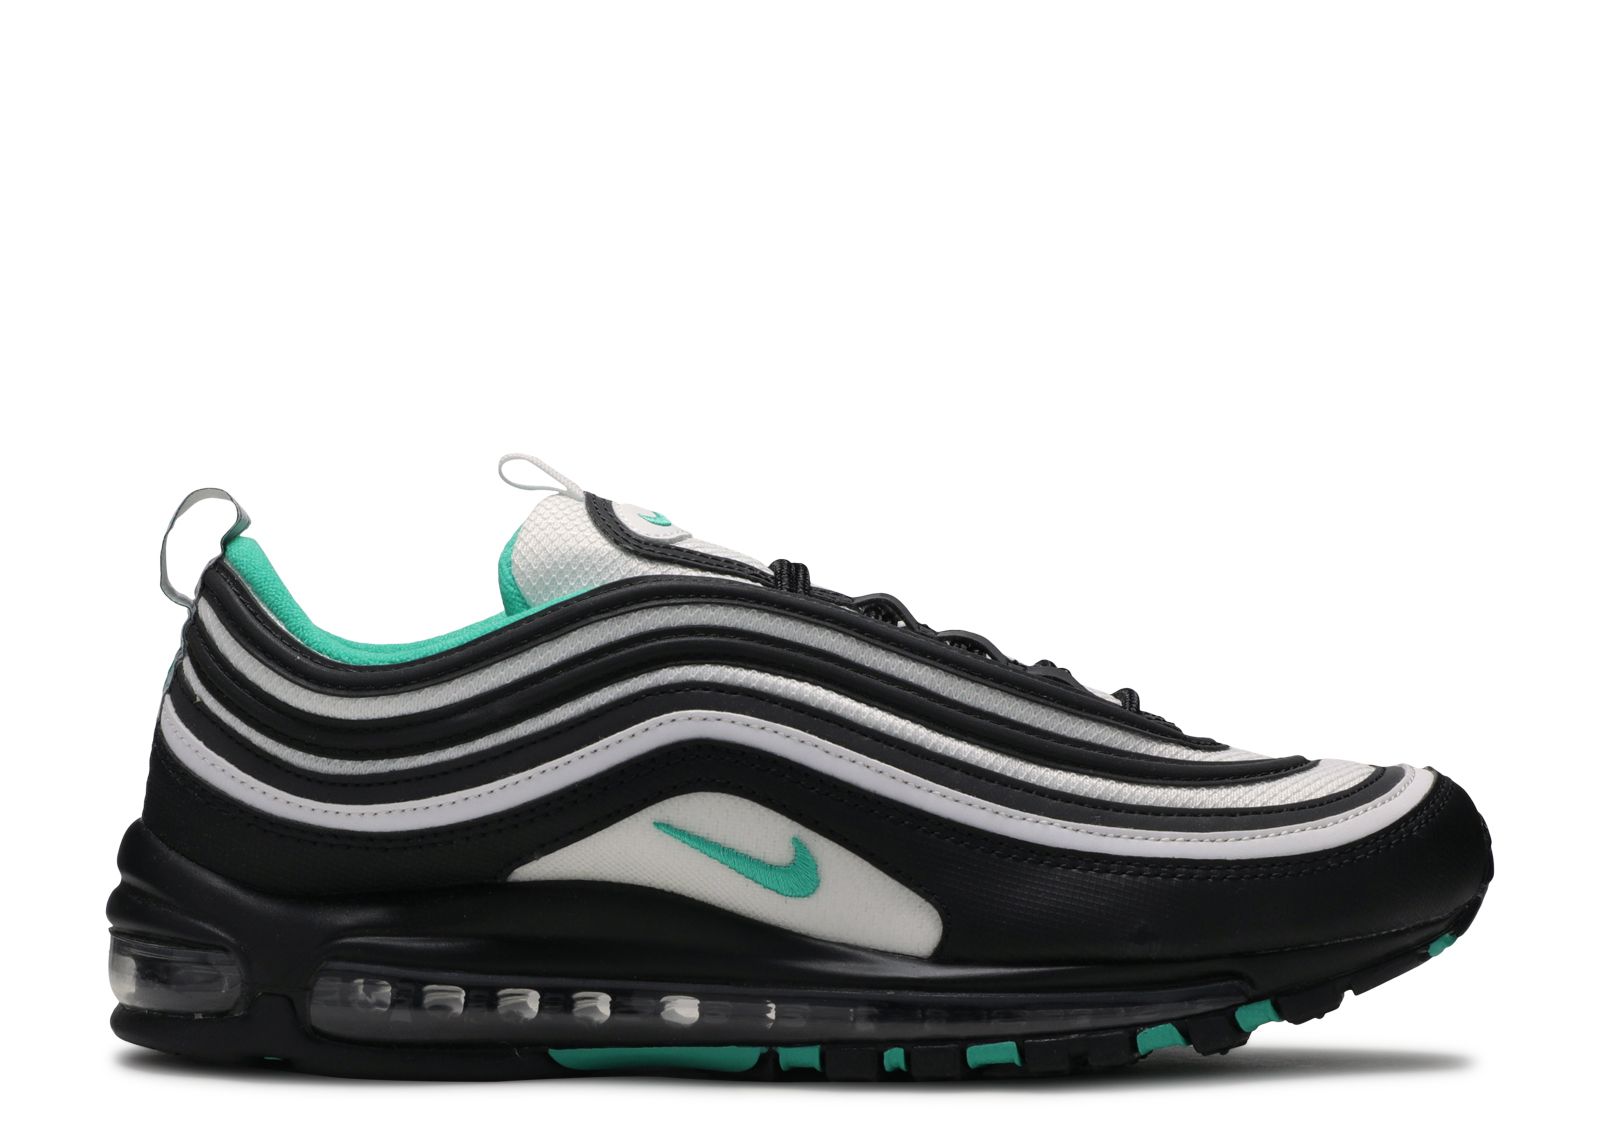 Tyler, the Creator Flexes in a Fresh Pair of Air Max 97 sunklo